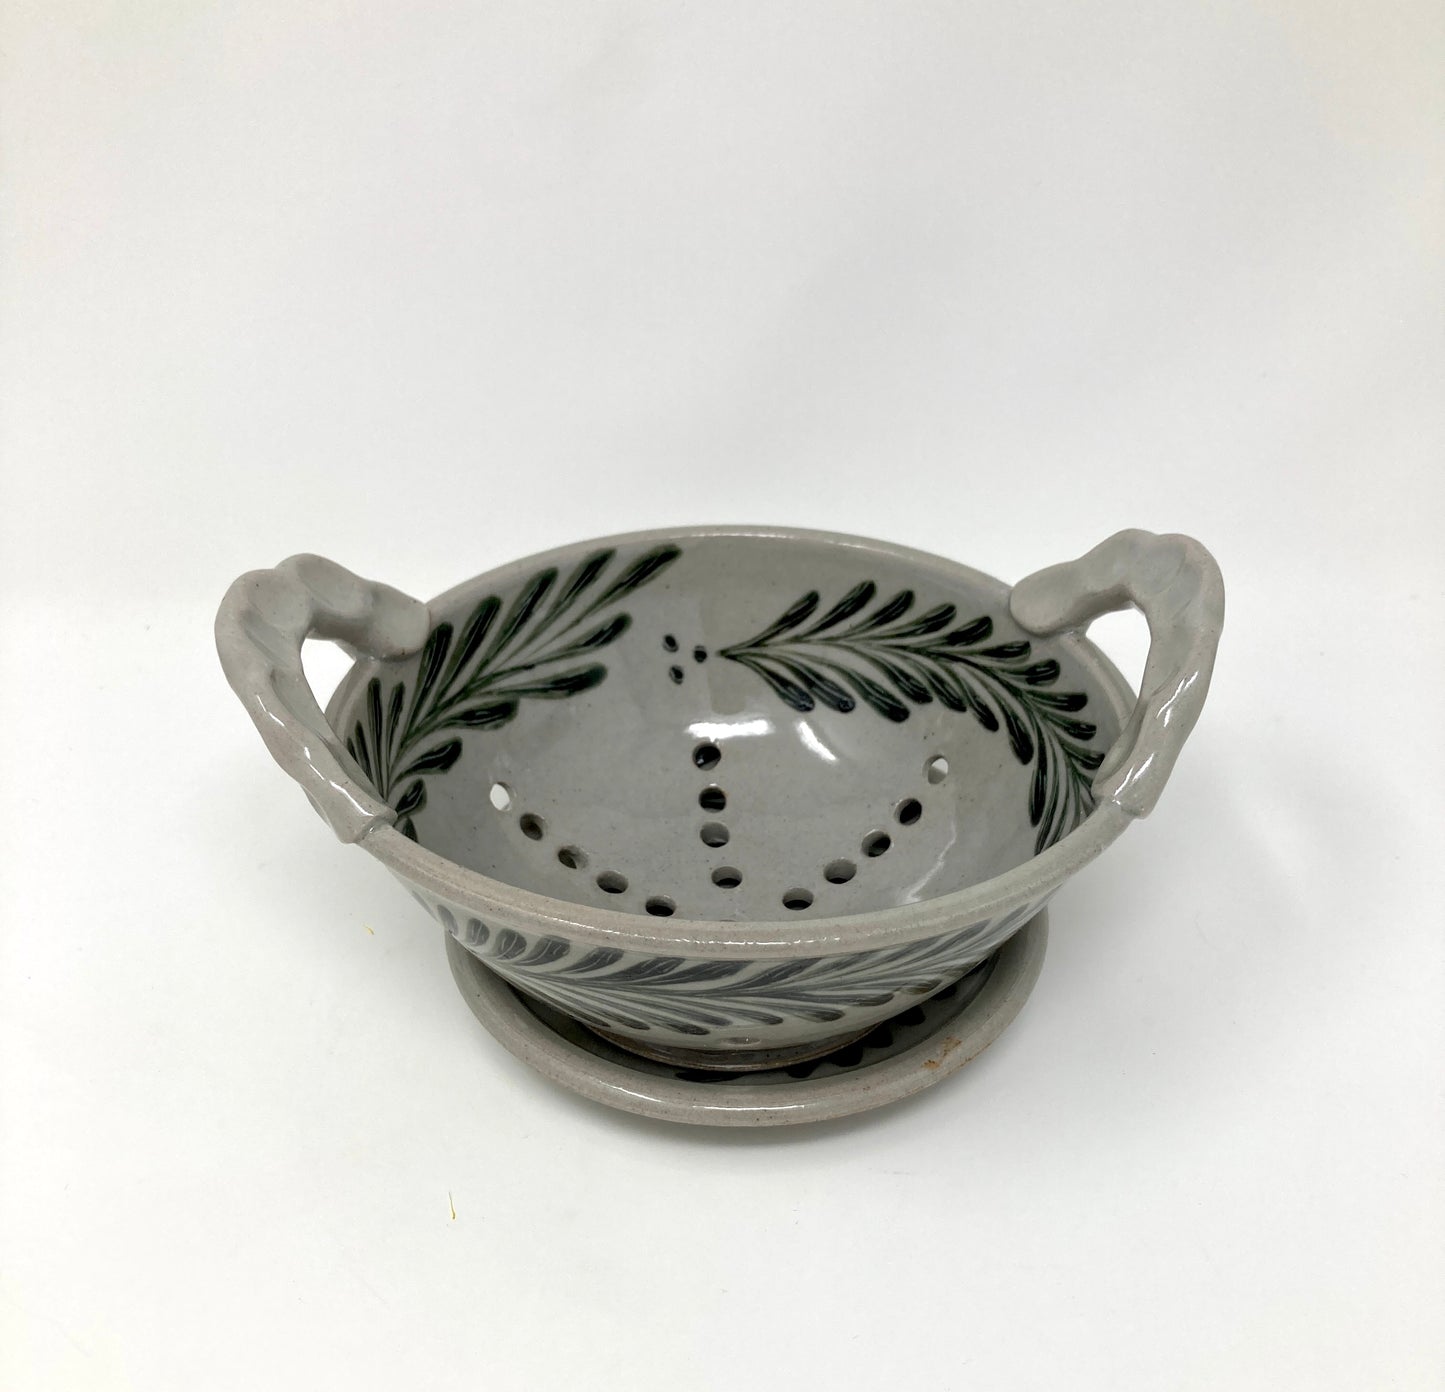 Berry Bowl with Pinched Handles, Brushwork Decoration